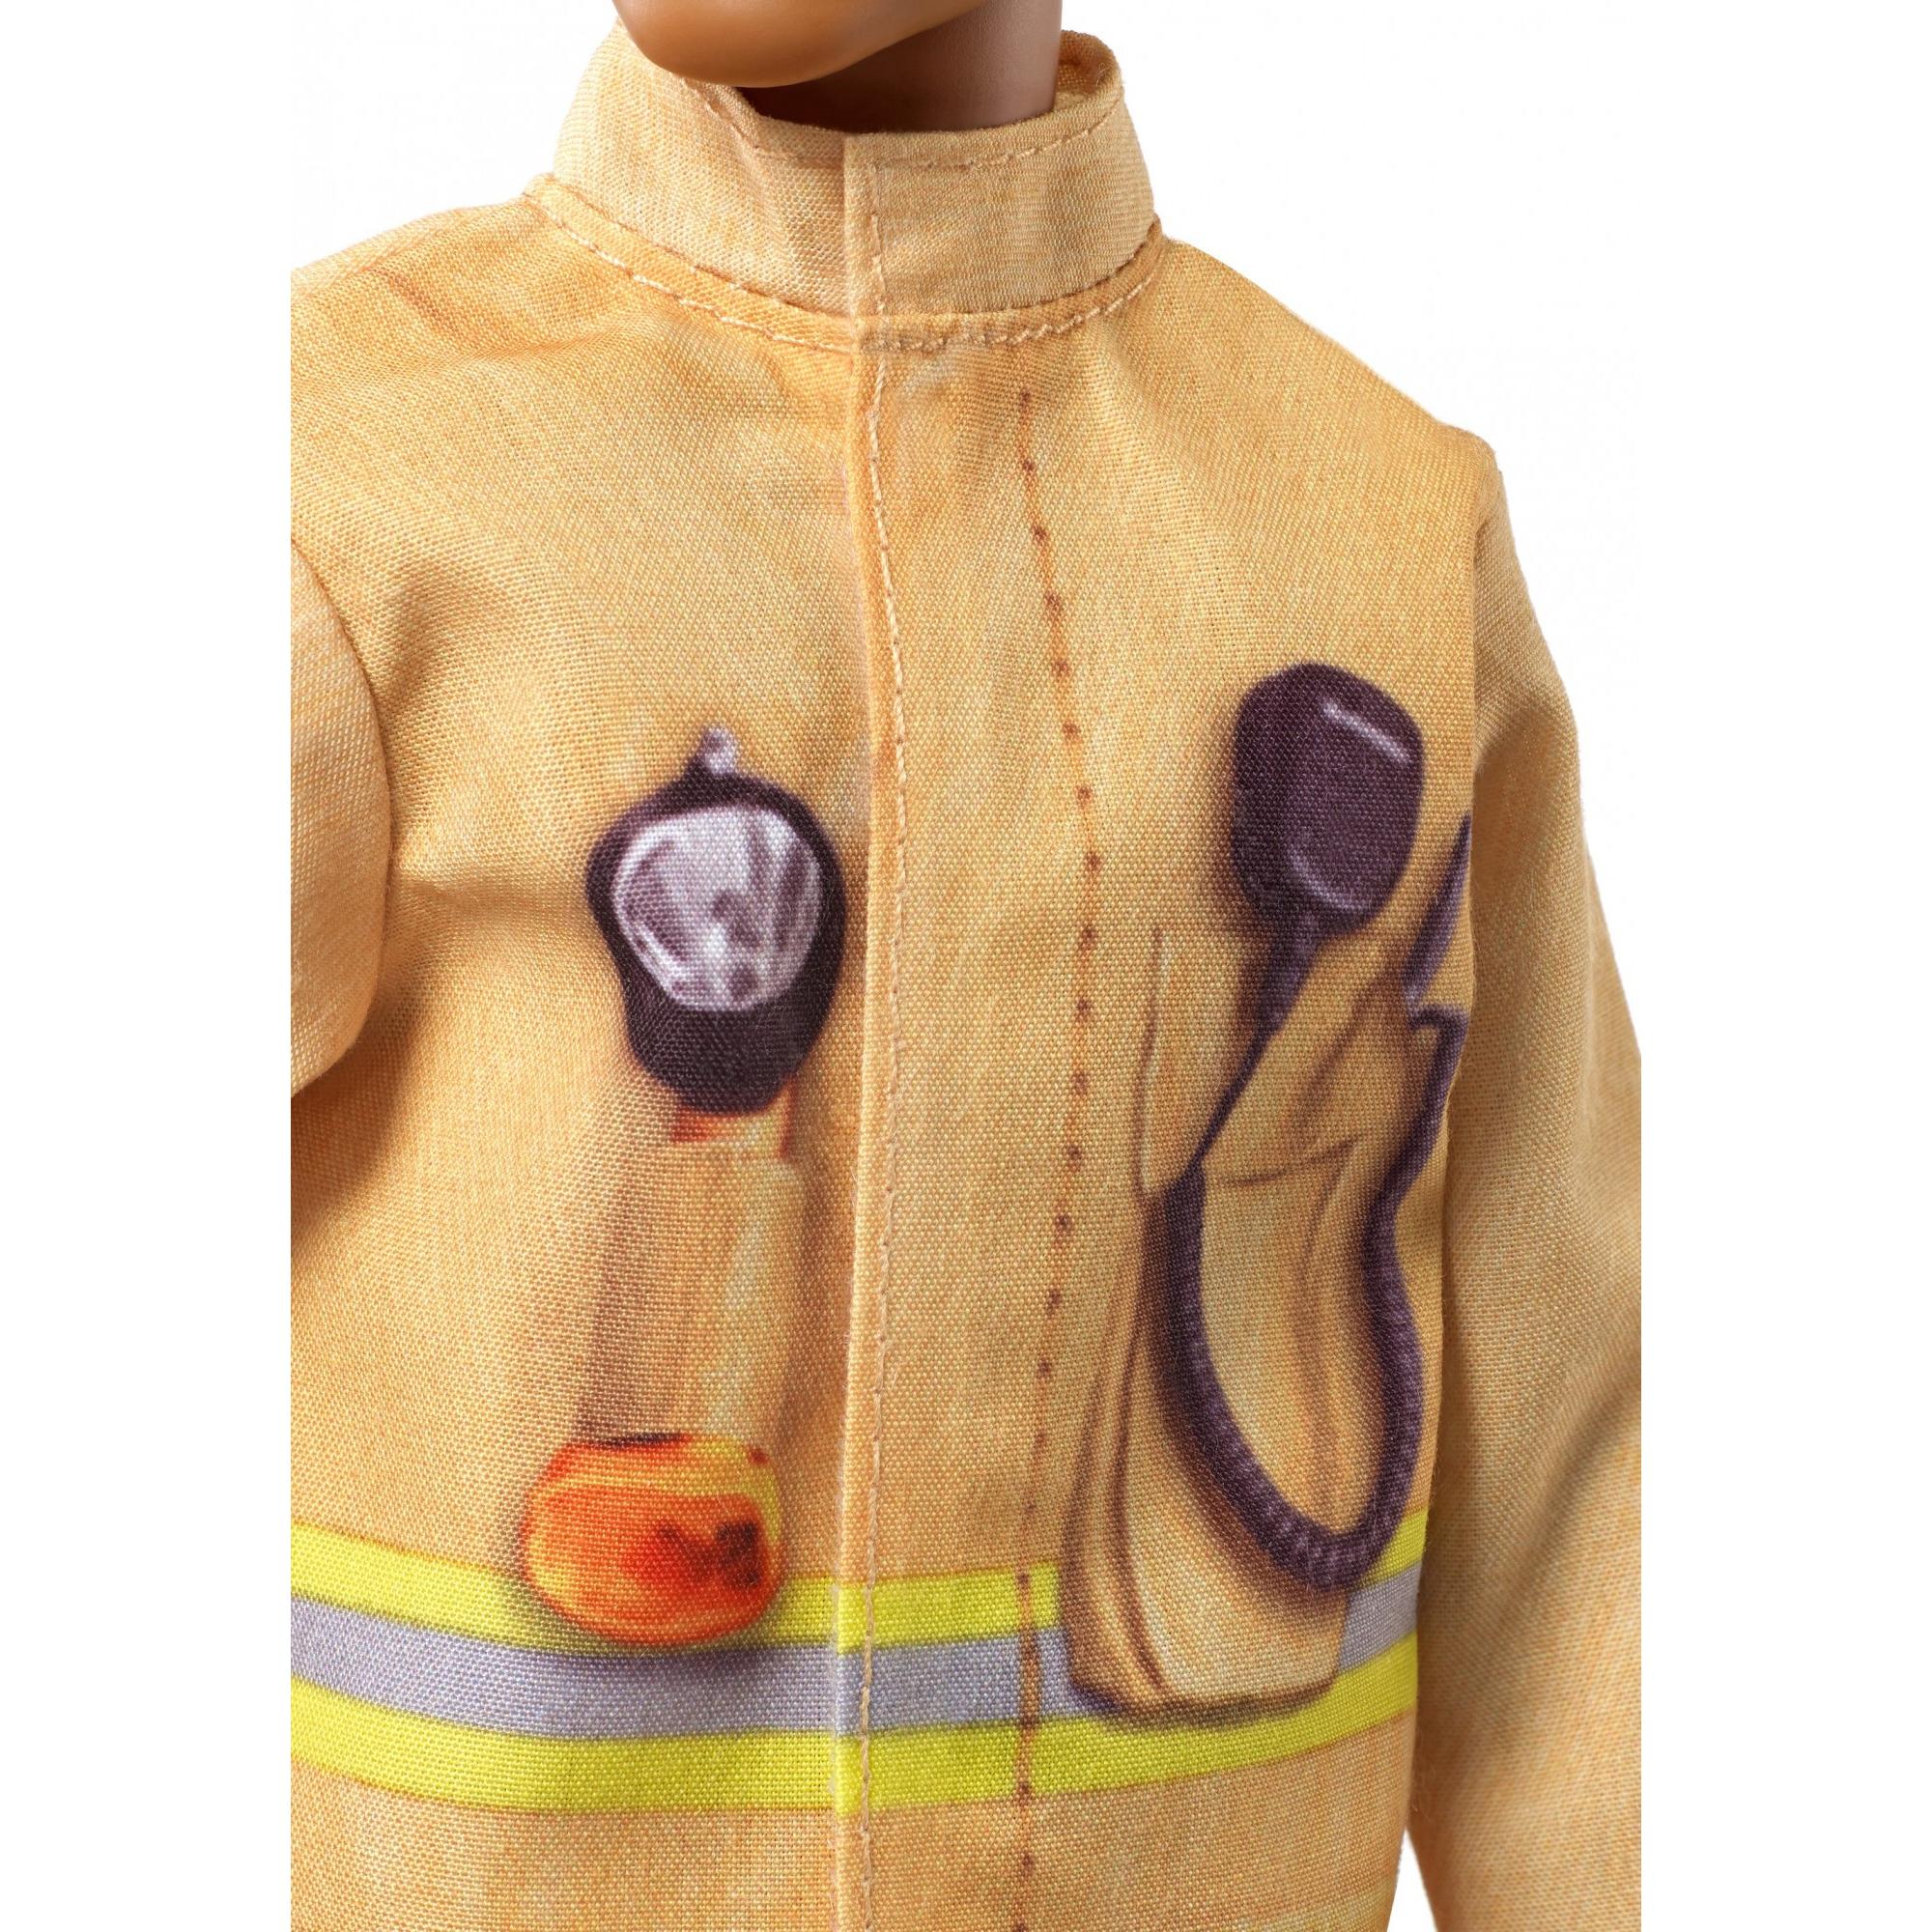 Barbie Ken Careers Firefighter Doll with Career-Themed Accessories - image 5 of 6